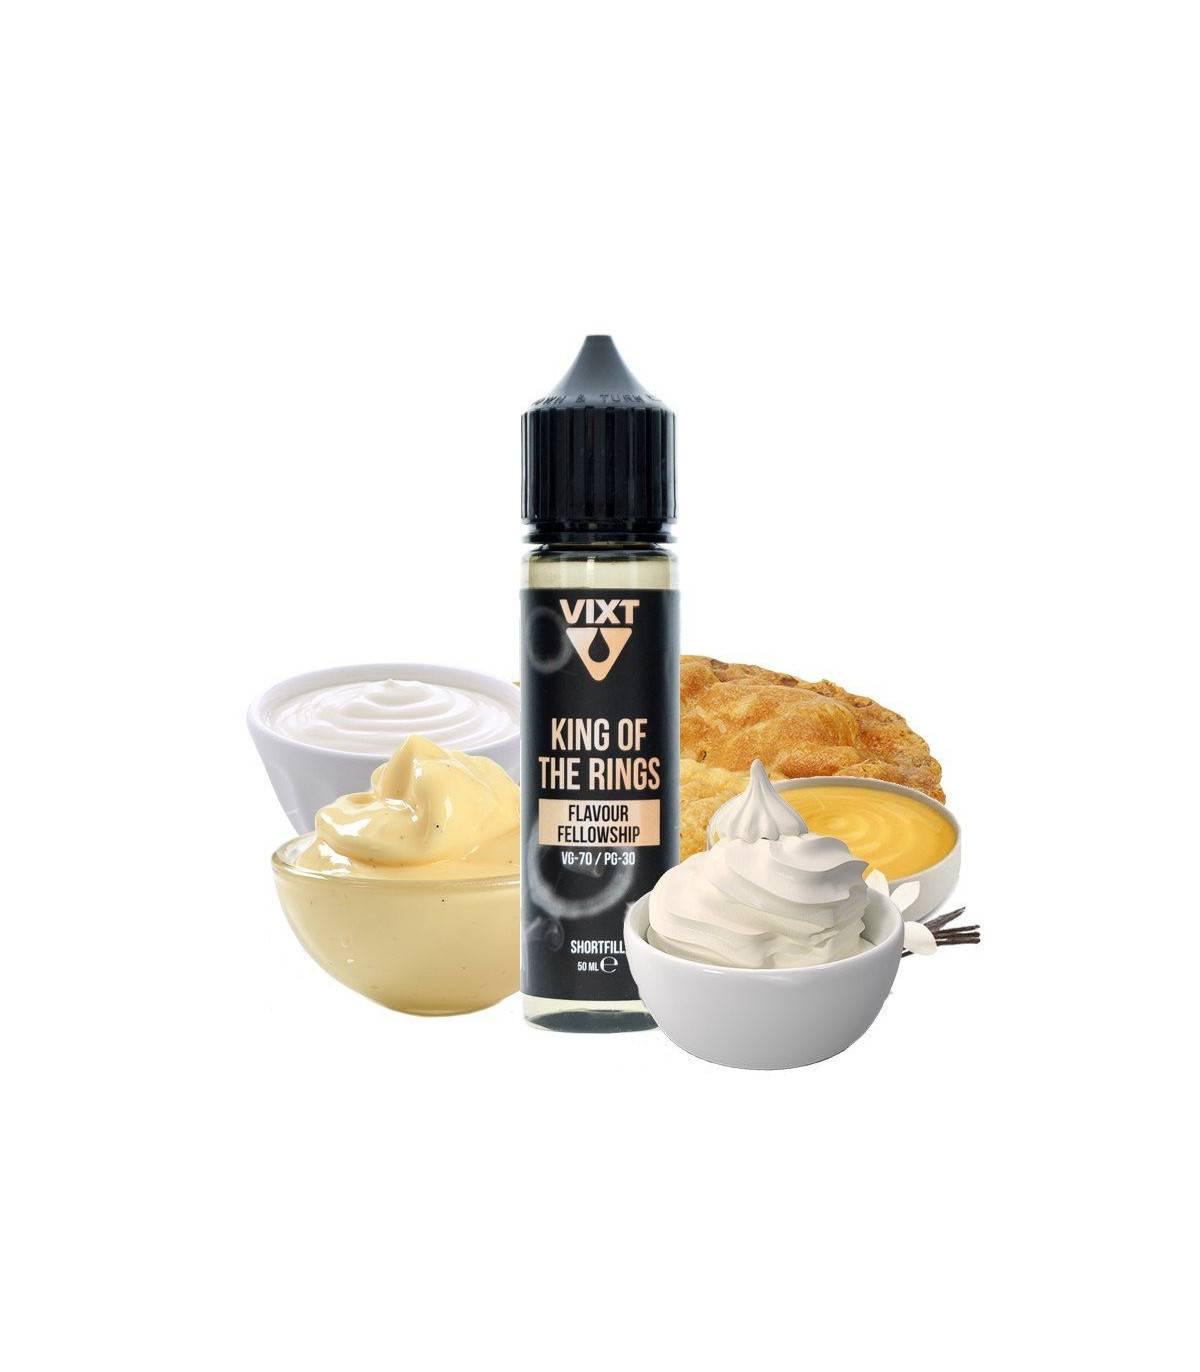 VIXT Flavour Fellowship (King of the Rings) 50ml